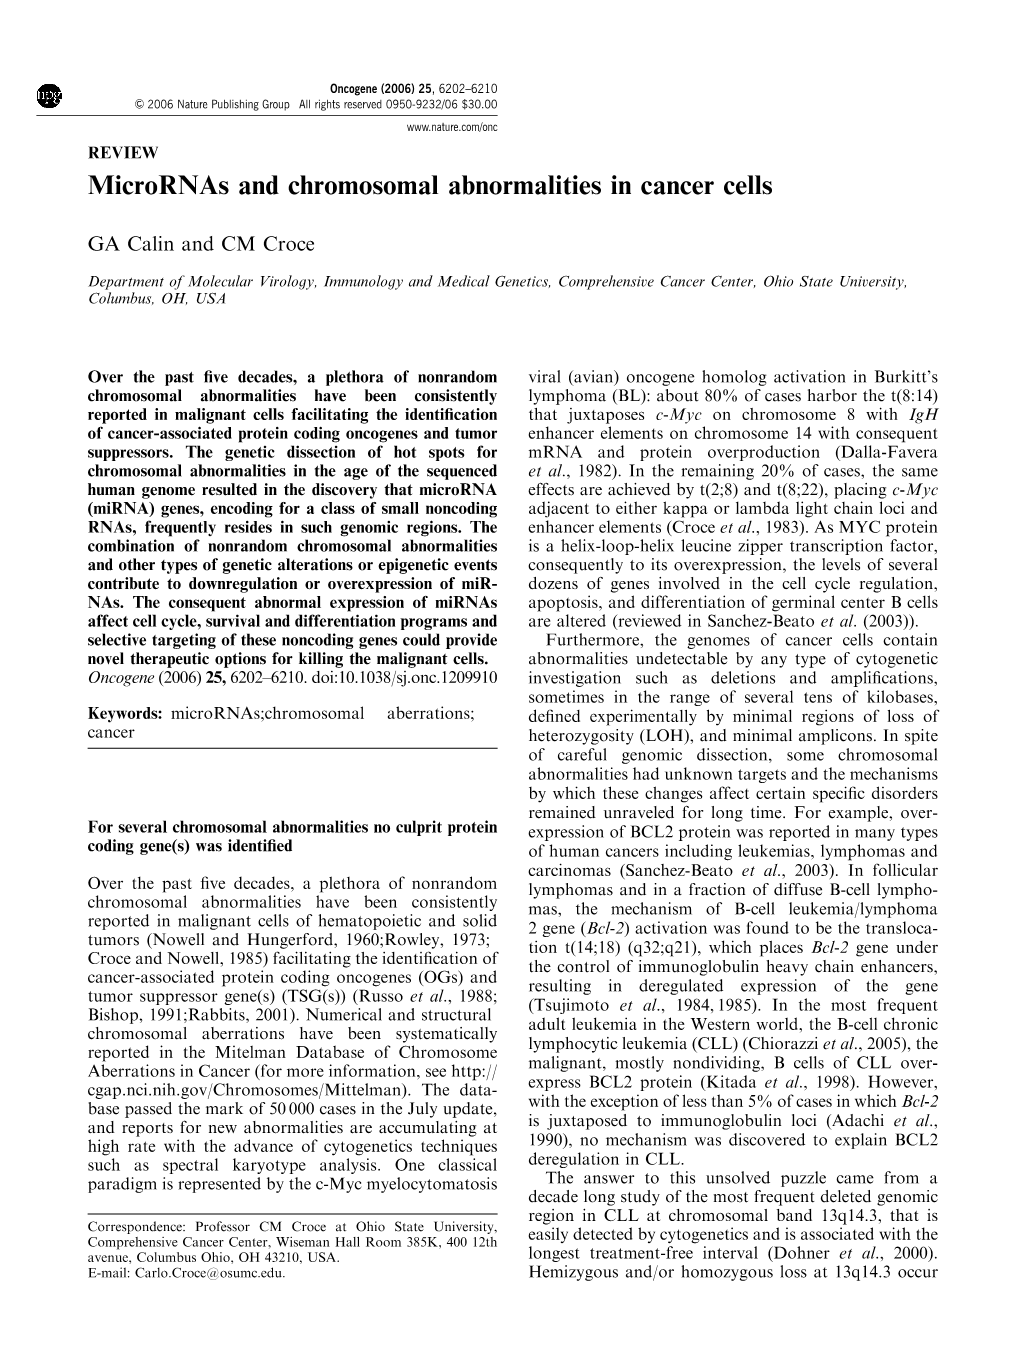 Micrornas and Chromosomal Abnormalities in Cancer Cells